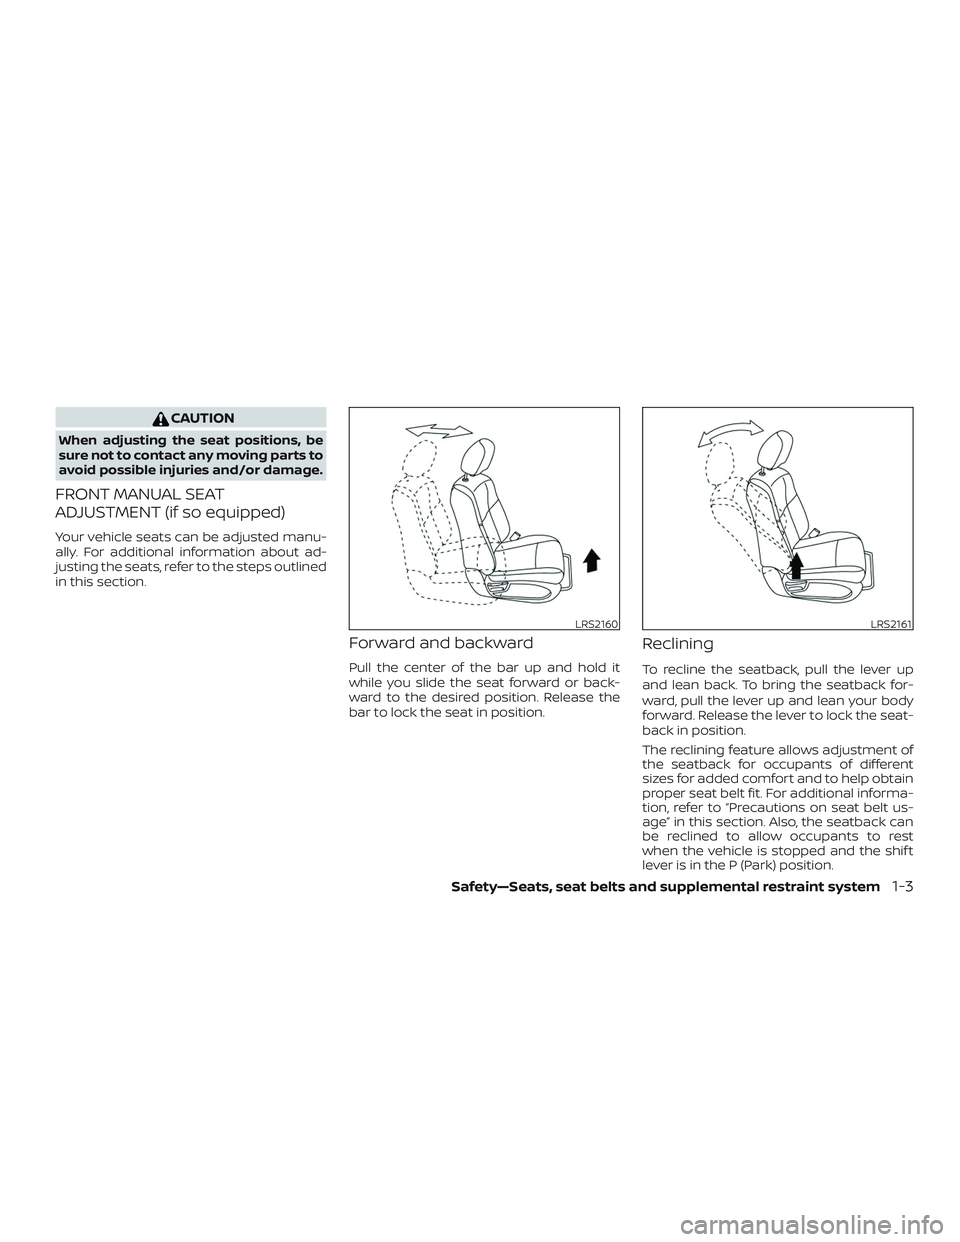 NISSAN ROGUE 2020  Owner´s Manual CAUTION
When adjusting the seat positions, be
sure not to contact any moving parts to
avoid possible injuries and/or damage.
FRONT MANUAL SEAT
ADJUSTMENT (if so equipped)
Your vehicle seats can be adj